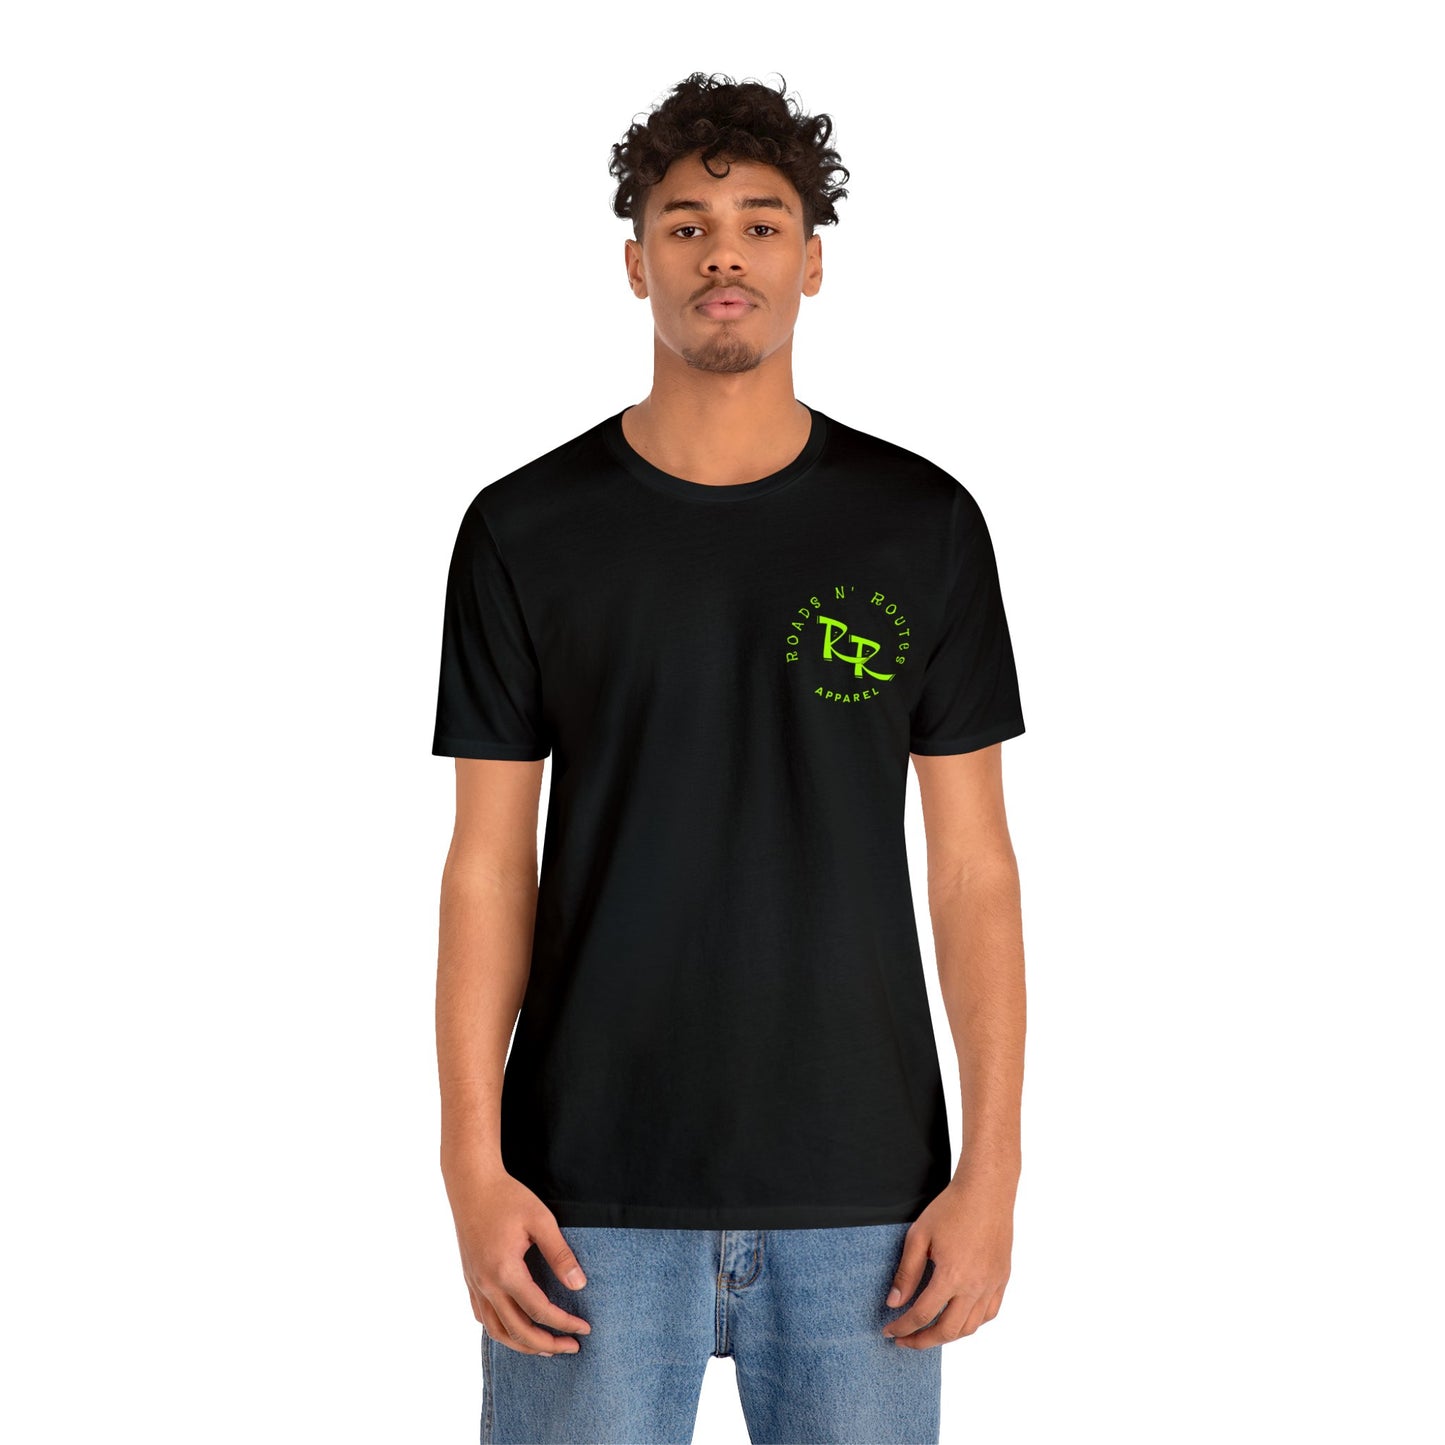 ROUTE 285, ROSWELL, N.M.,  Unisex Jersey Short Sleeve Tee